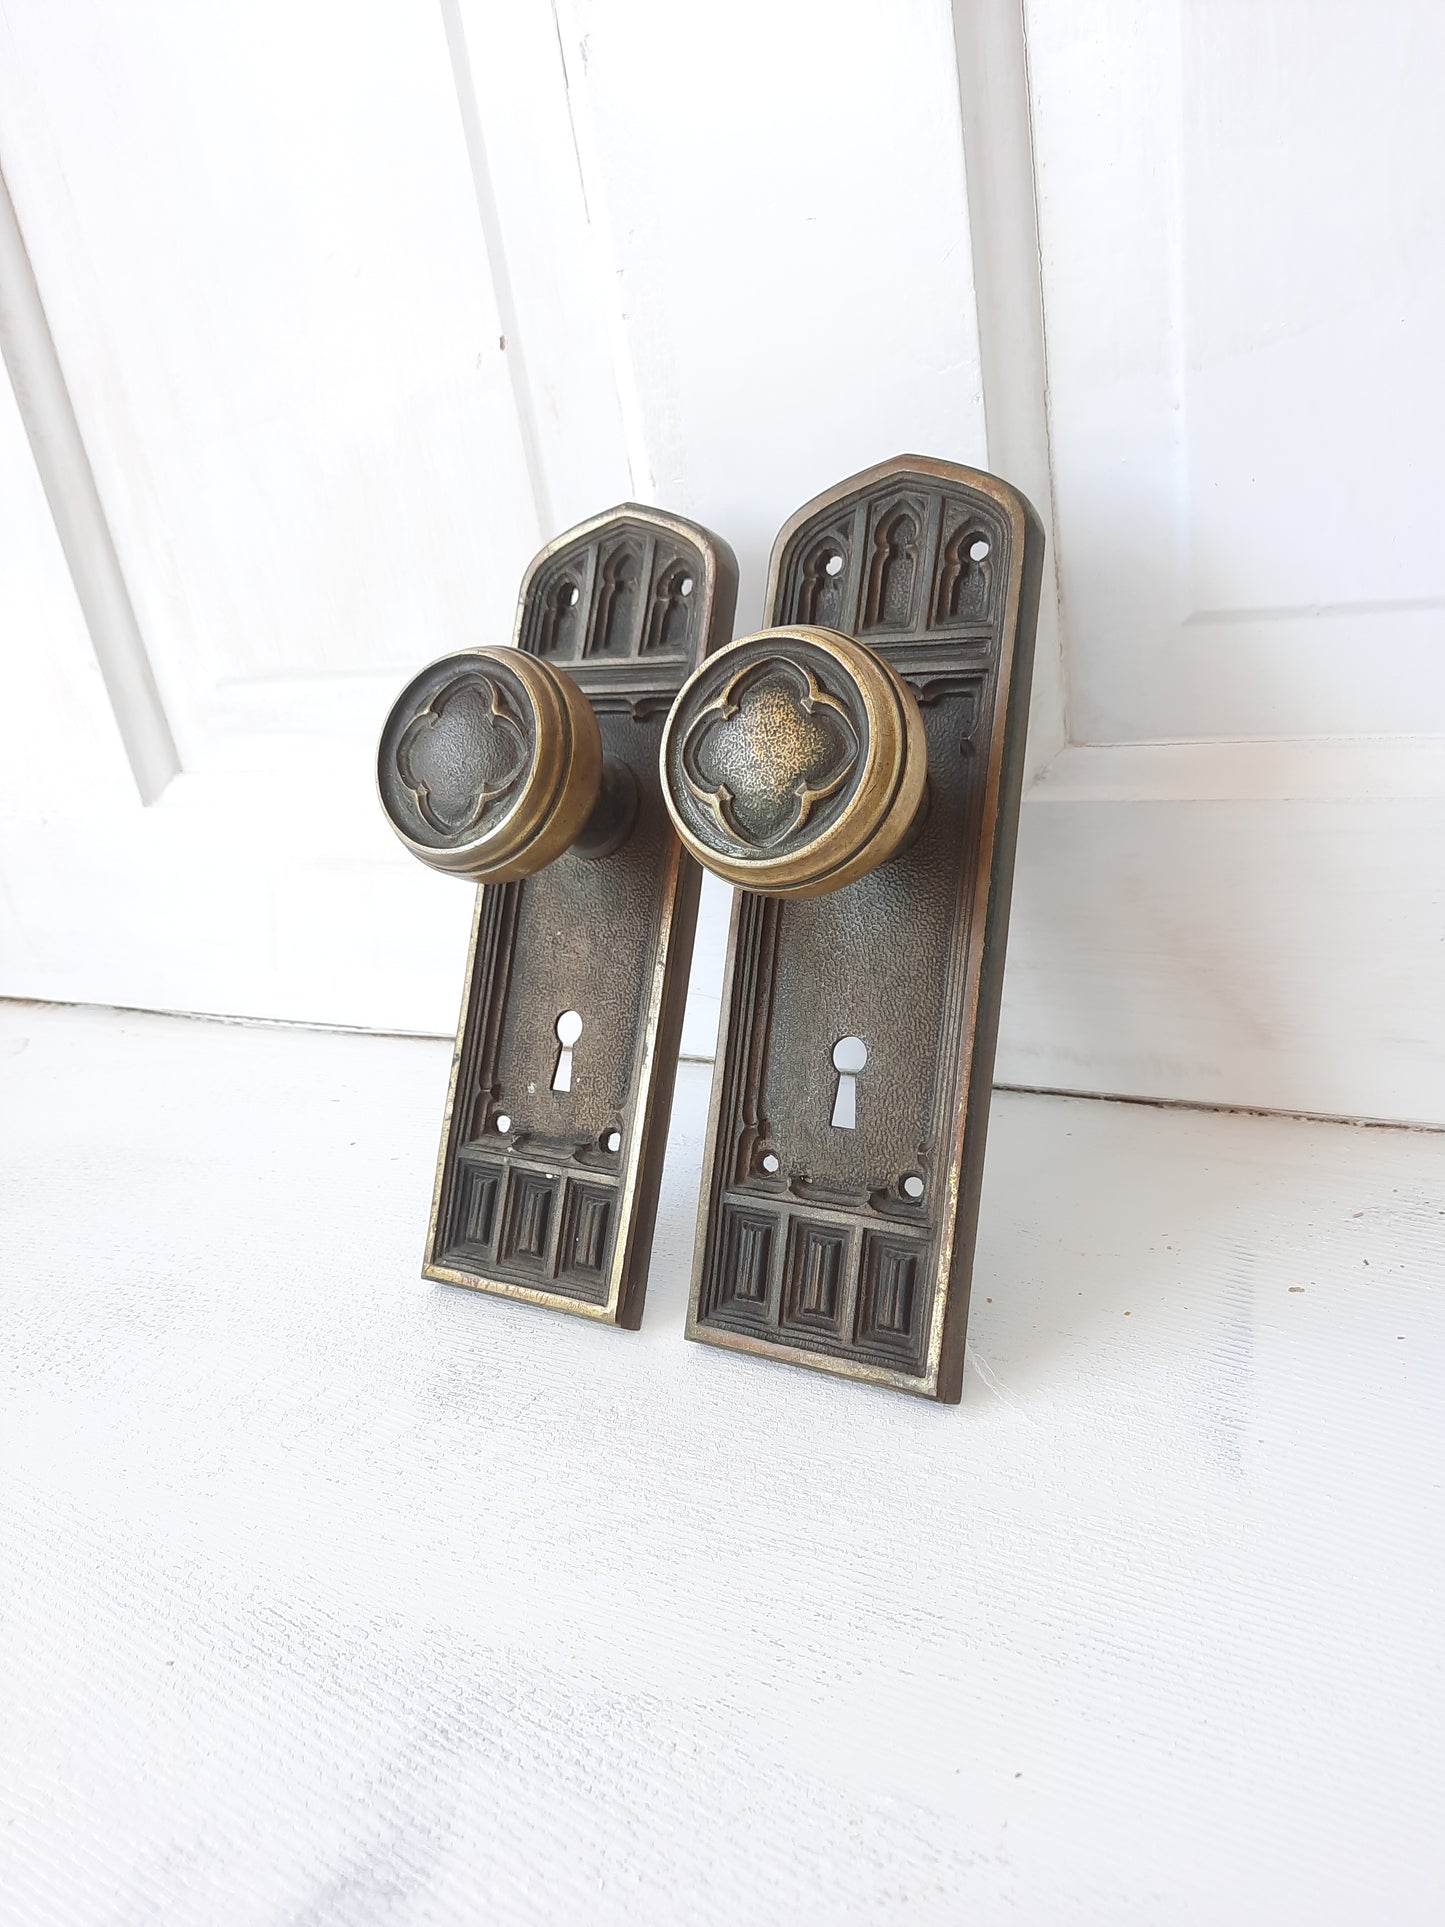 Full Set of Newark Pattern Bronze Doorknobs and Plates, Gothic Style Door Knob and Plates Set